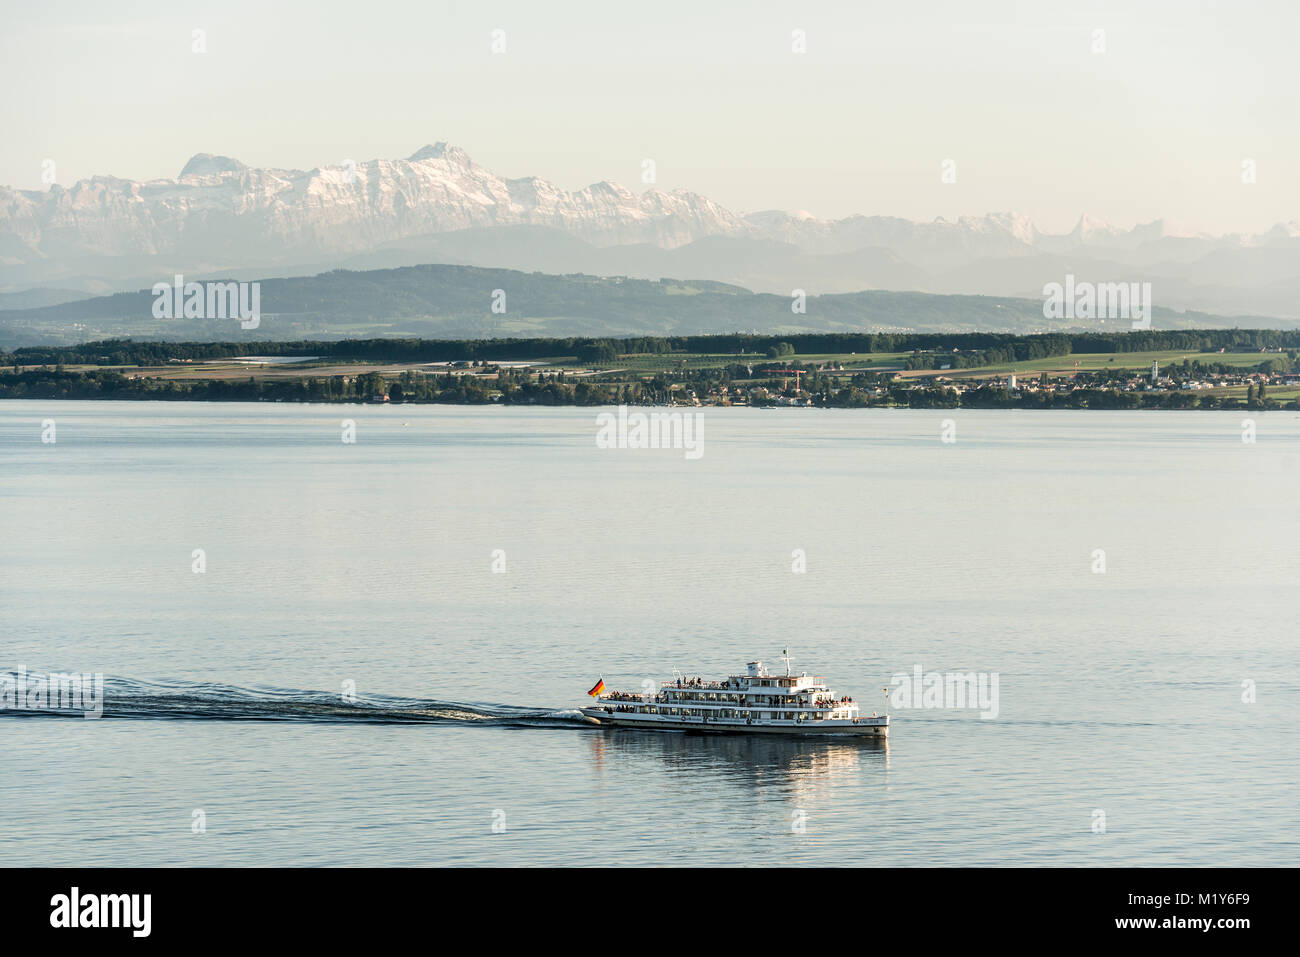 View of Lake Constance with excursion boat, in the back the Swiss Alps with Säntis, near Meersburg, Baden-Württemberg, Germany Stock Photo